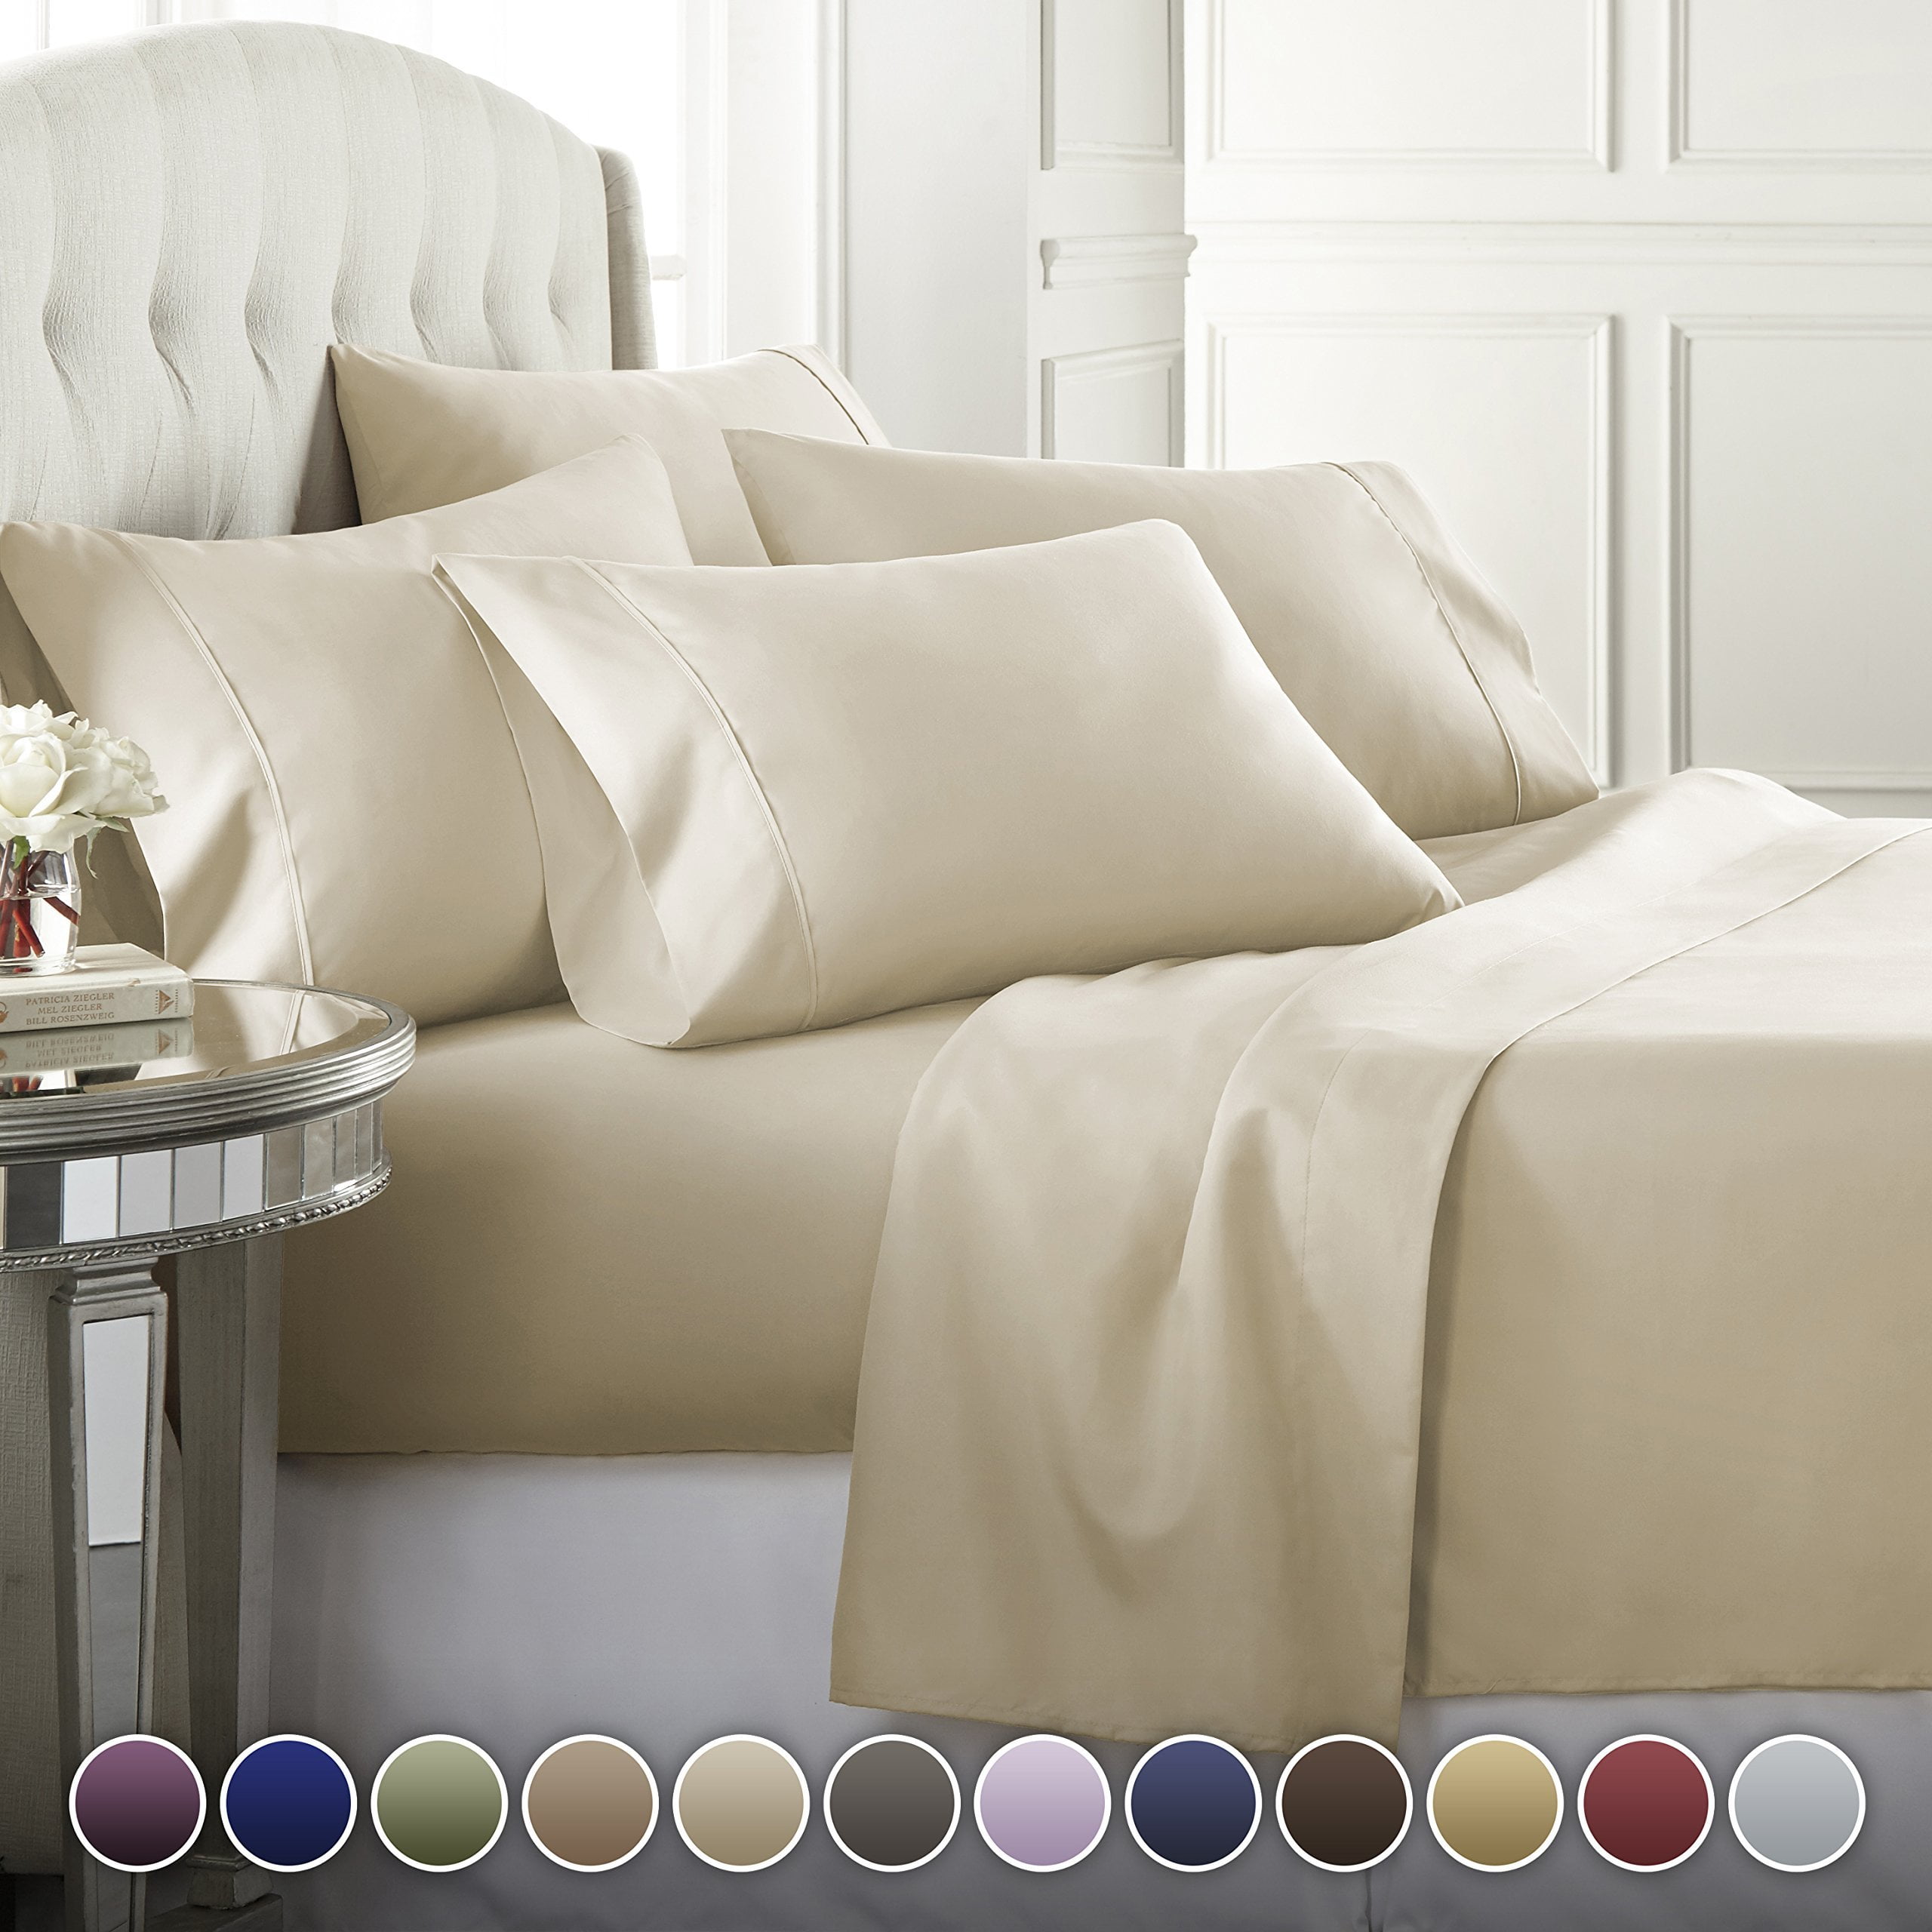 Details about   LUXURIOUS Solid Bed Sheet Set 100% Egyptian Cotton Queen/King Sizes 15"-18" Deep 